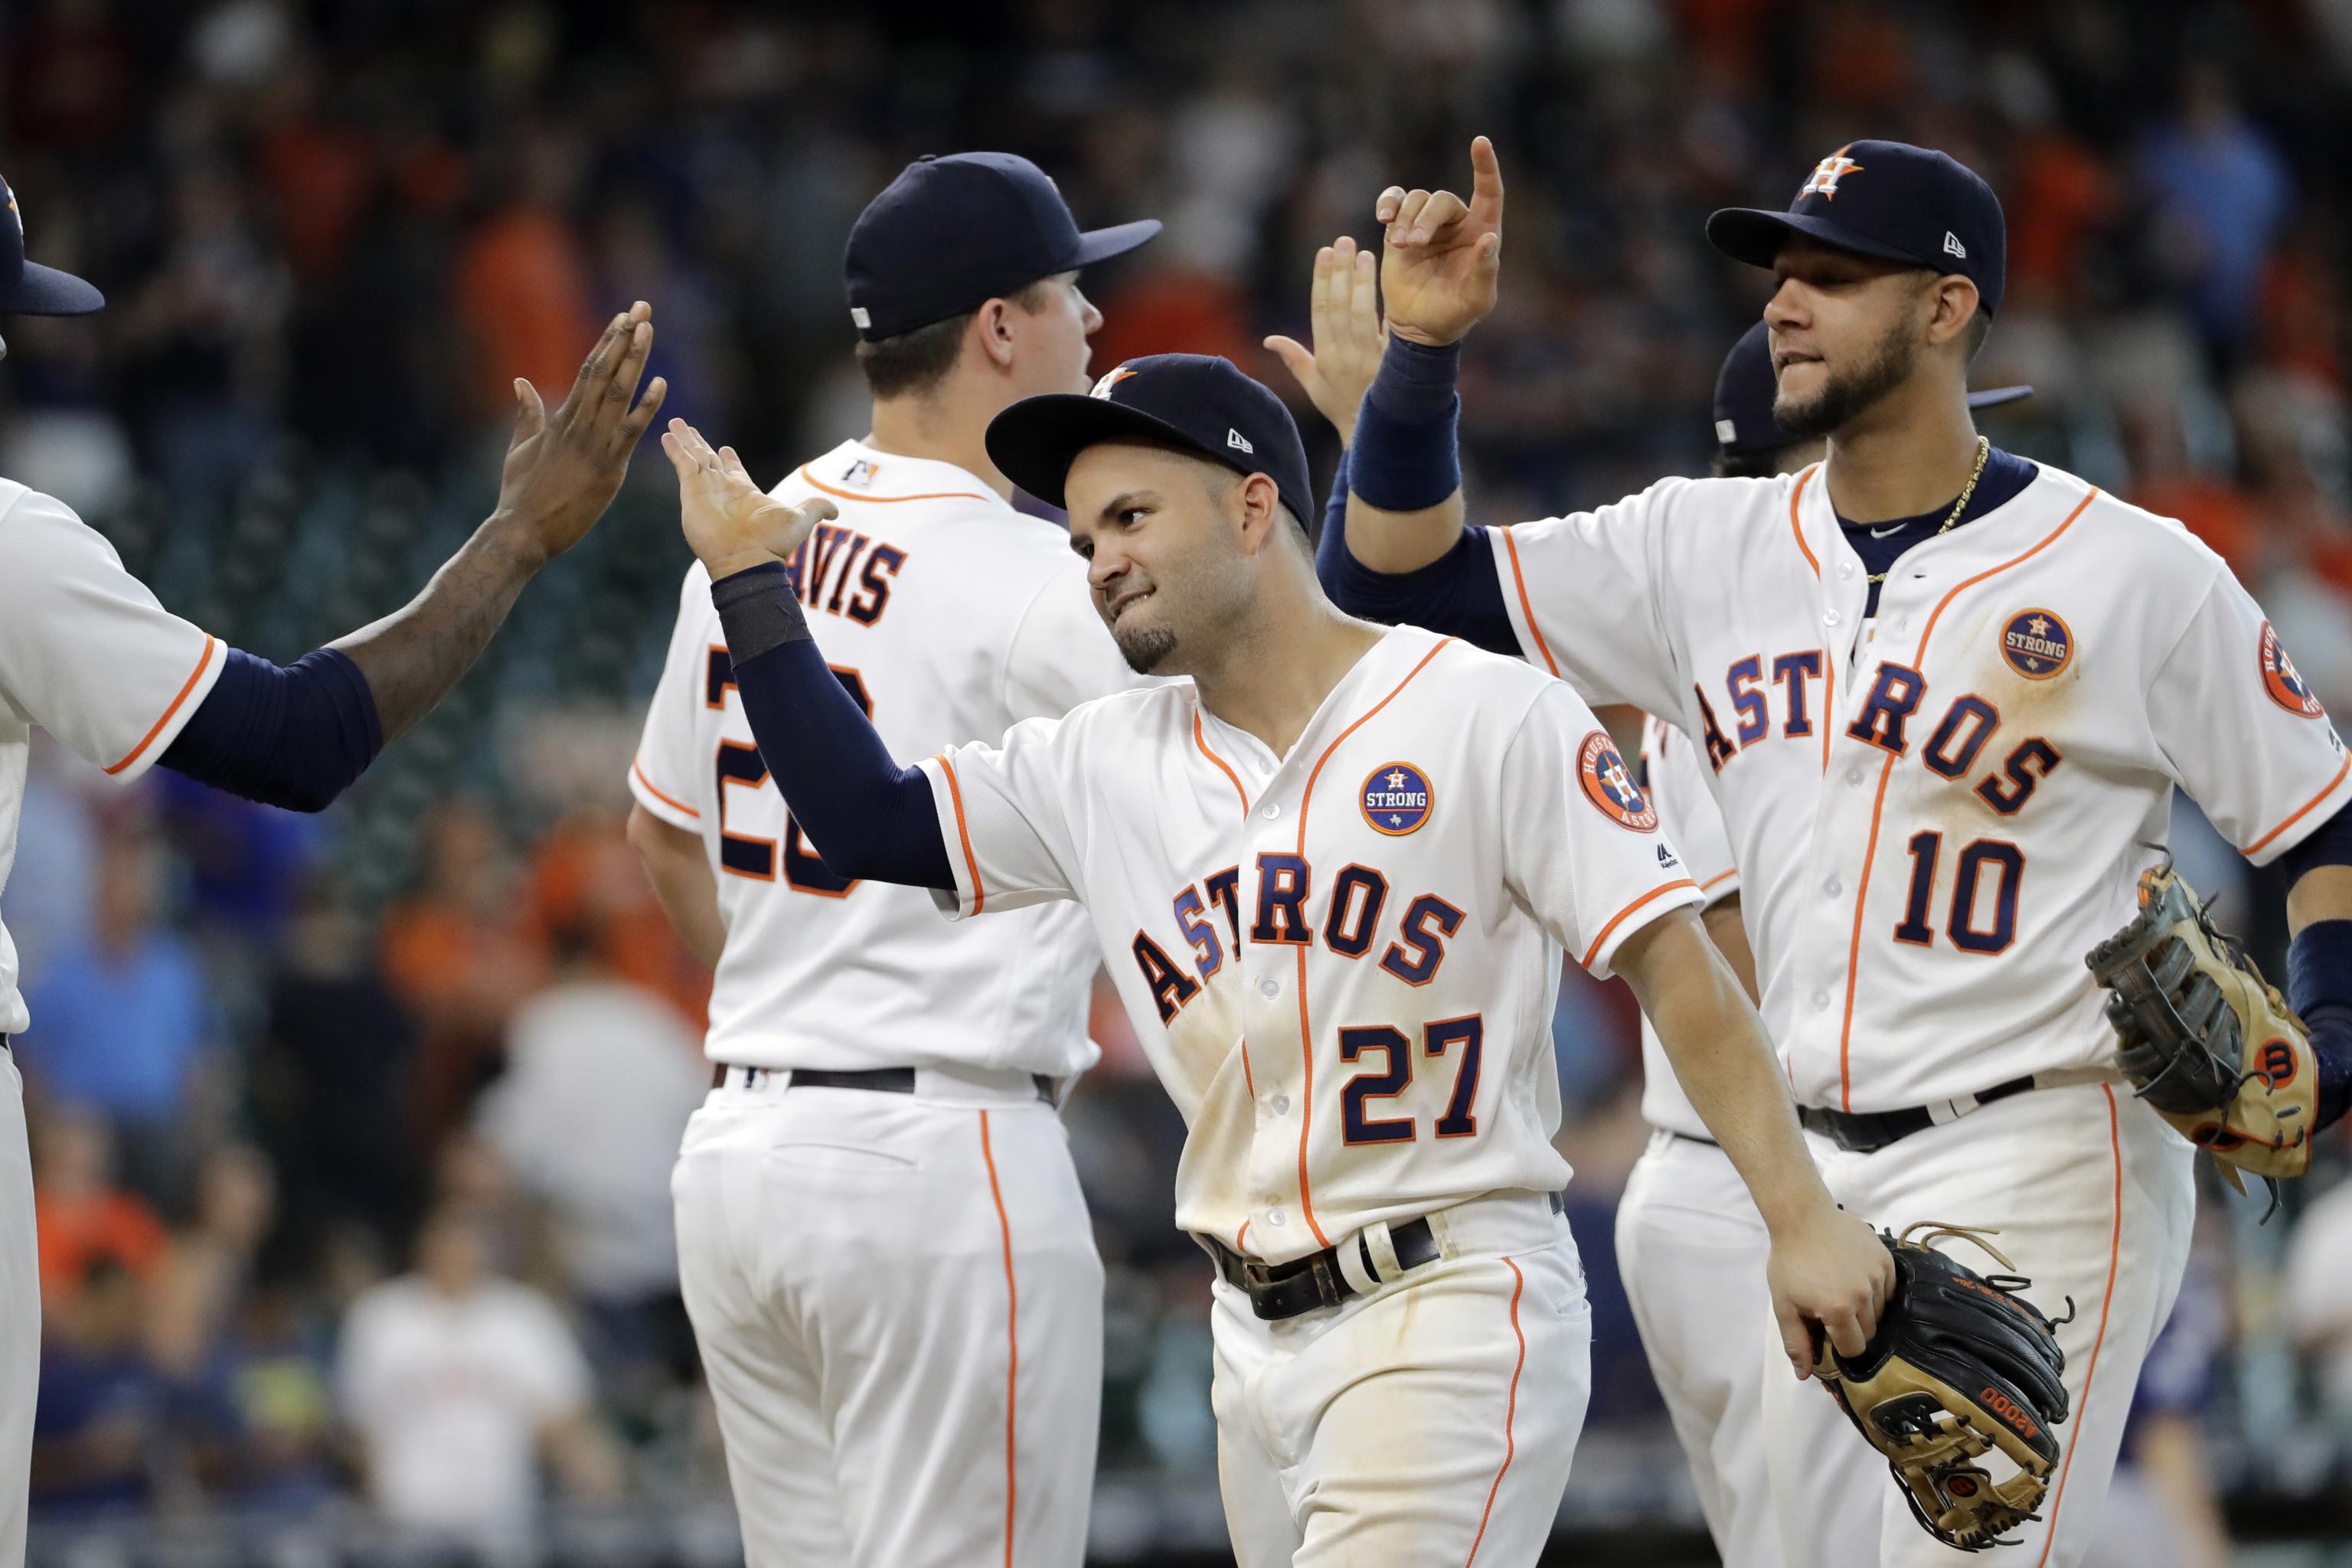 The Astros are proving they have an all-time great lineup, with or